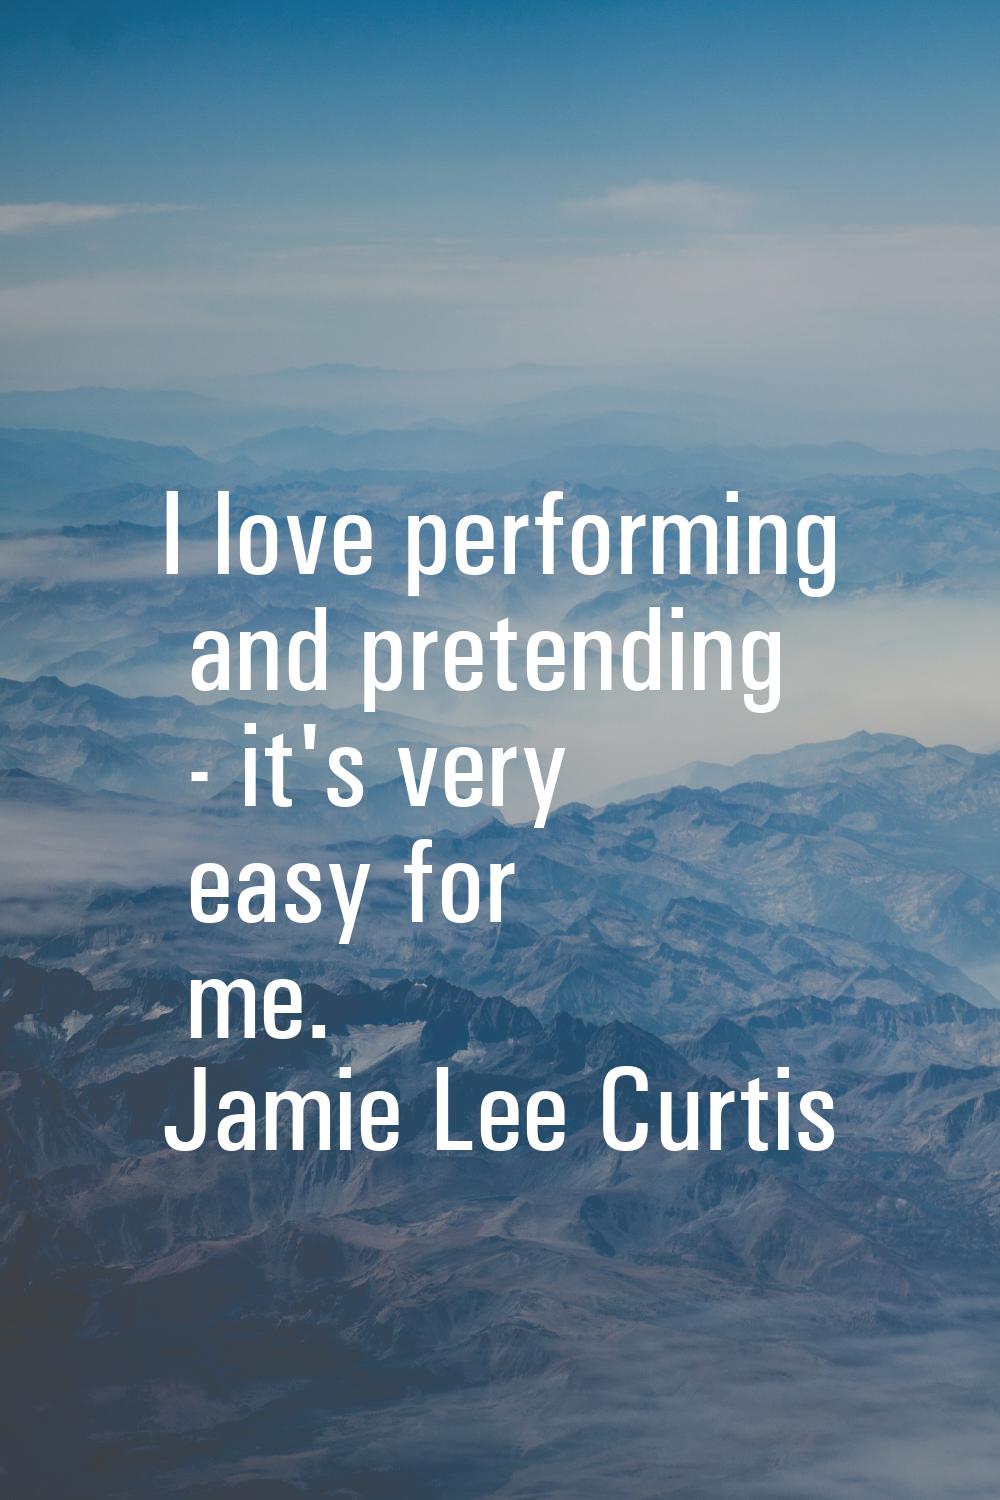 I love performing and pretending - it's very easy for me.